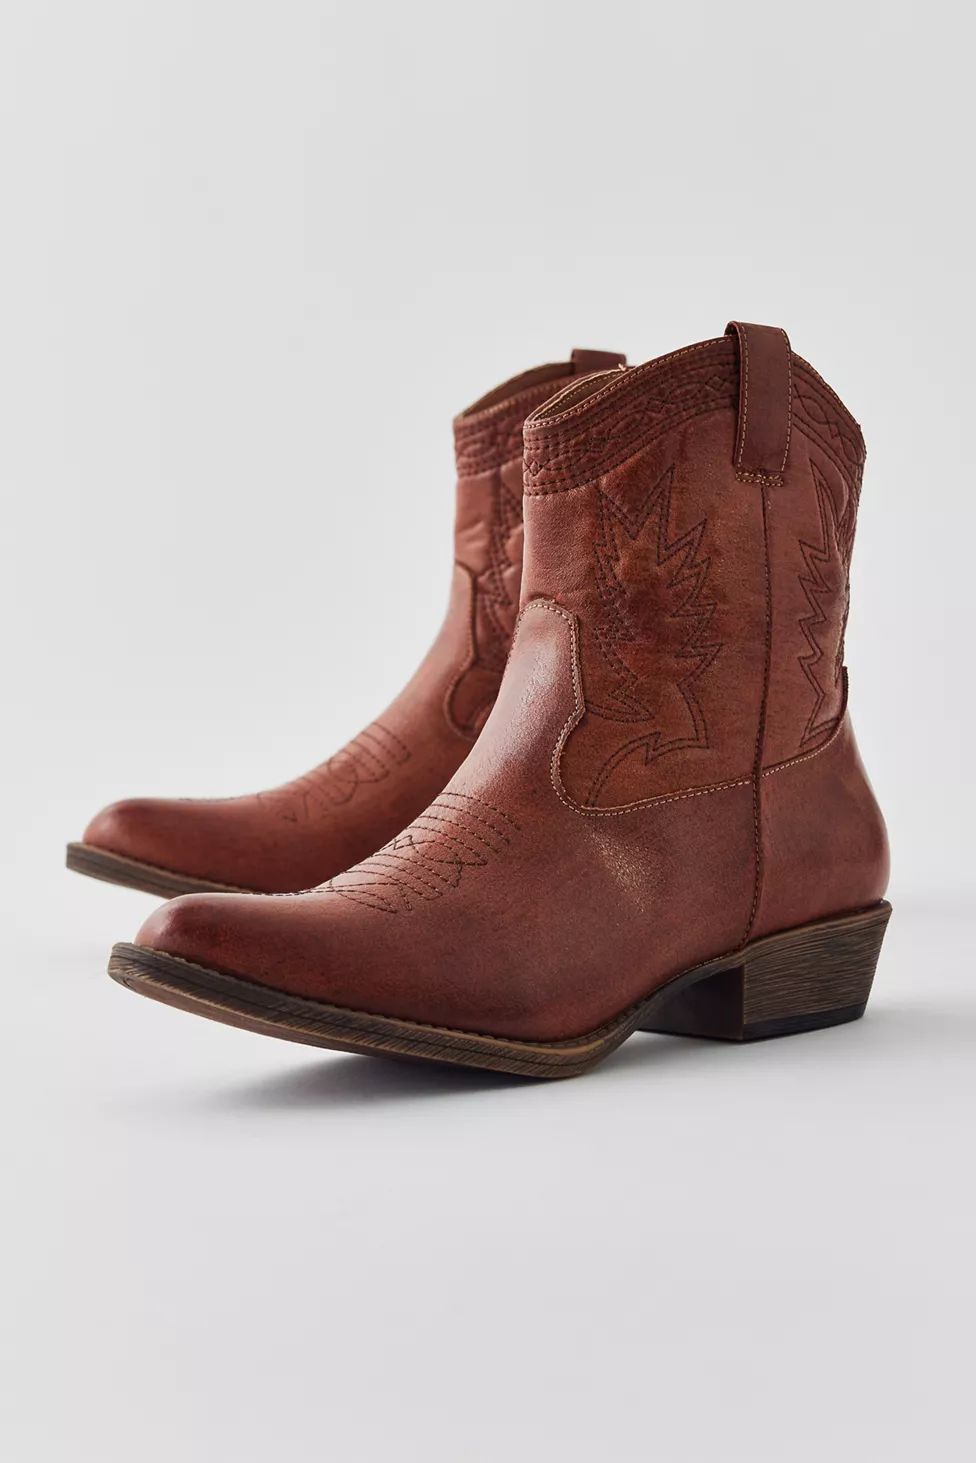 Matisse Footwear Pistol Cowboy Boot | Urban Outfitters (US and RoW)